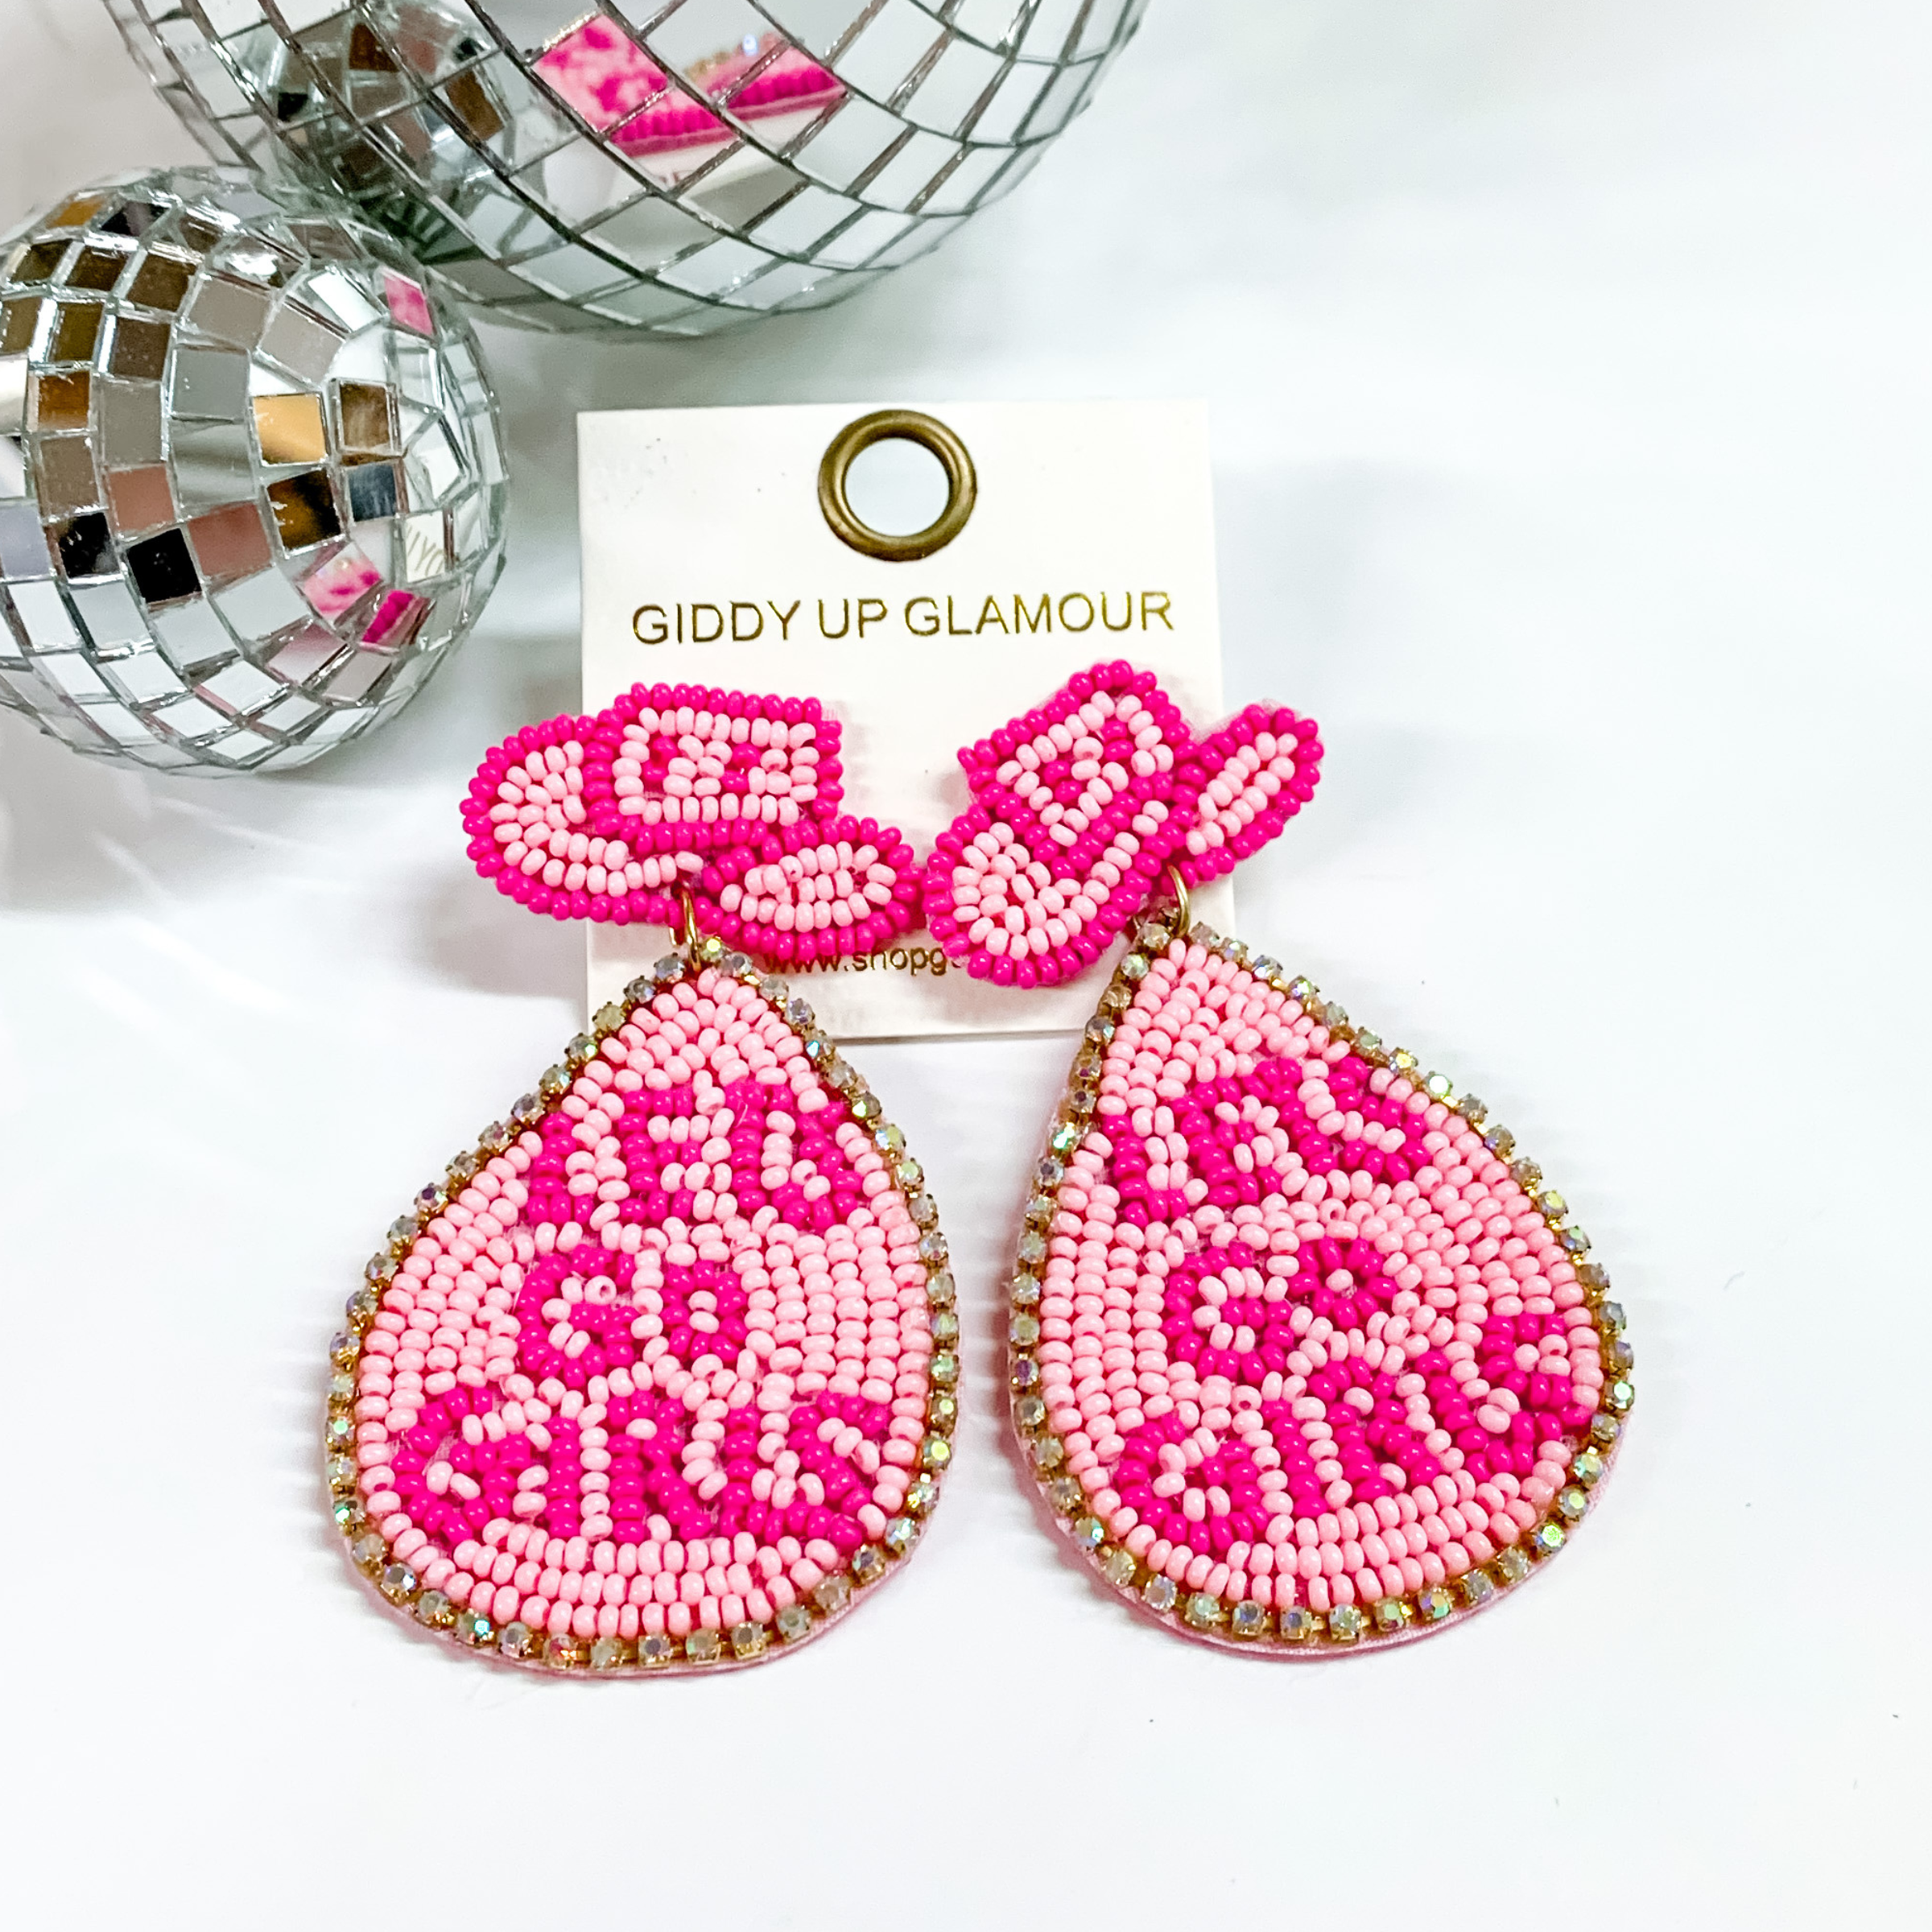 Pink beaded cowboy hat earrings with a pink hanging teardrop, The teardrop includes the words "LETS GO GIRLS" in dark pink and is outlined with ab crystals. These earrings are pictured on a white background with disco balls at the top.